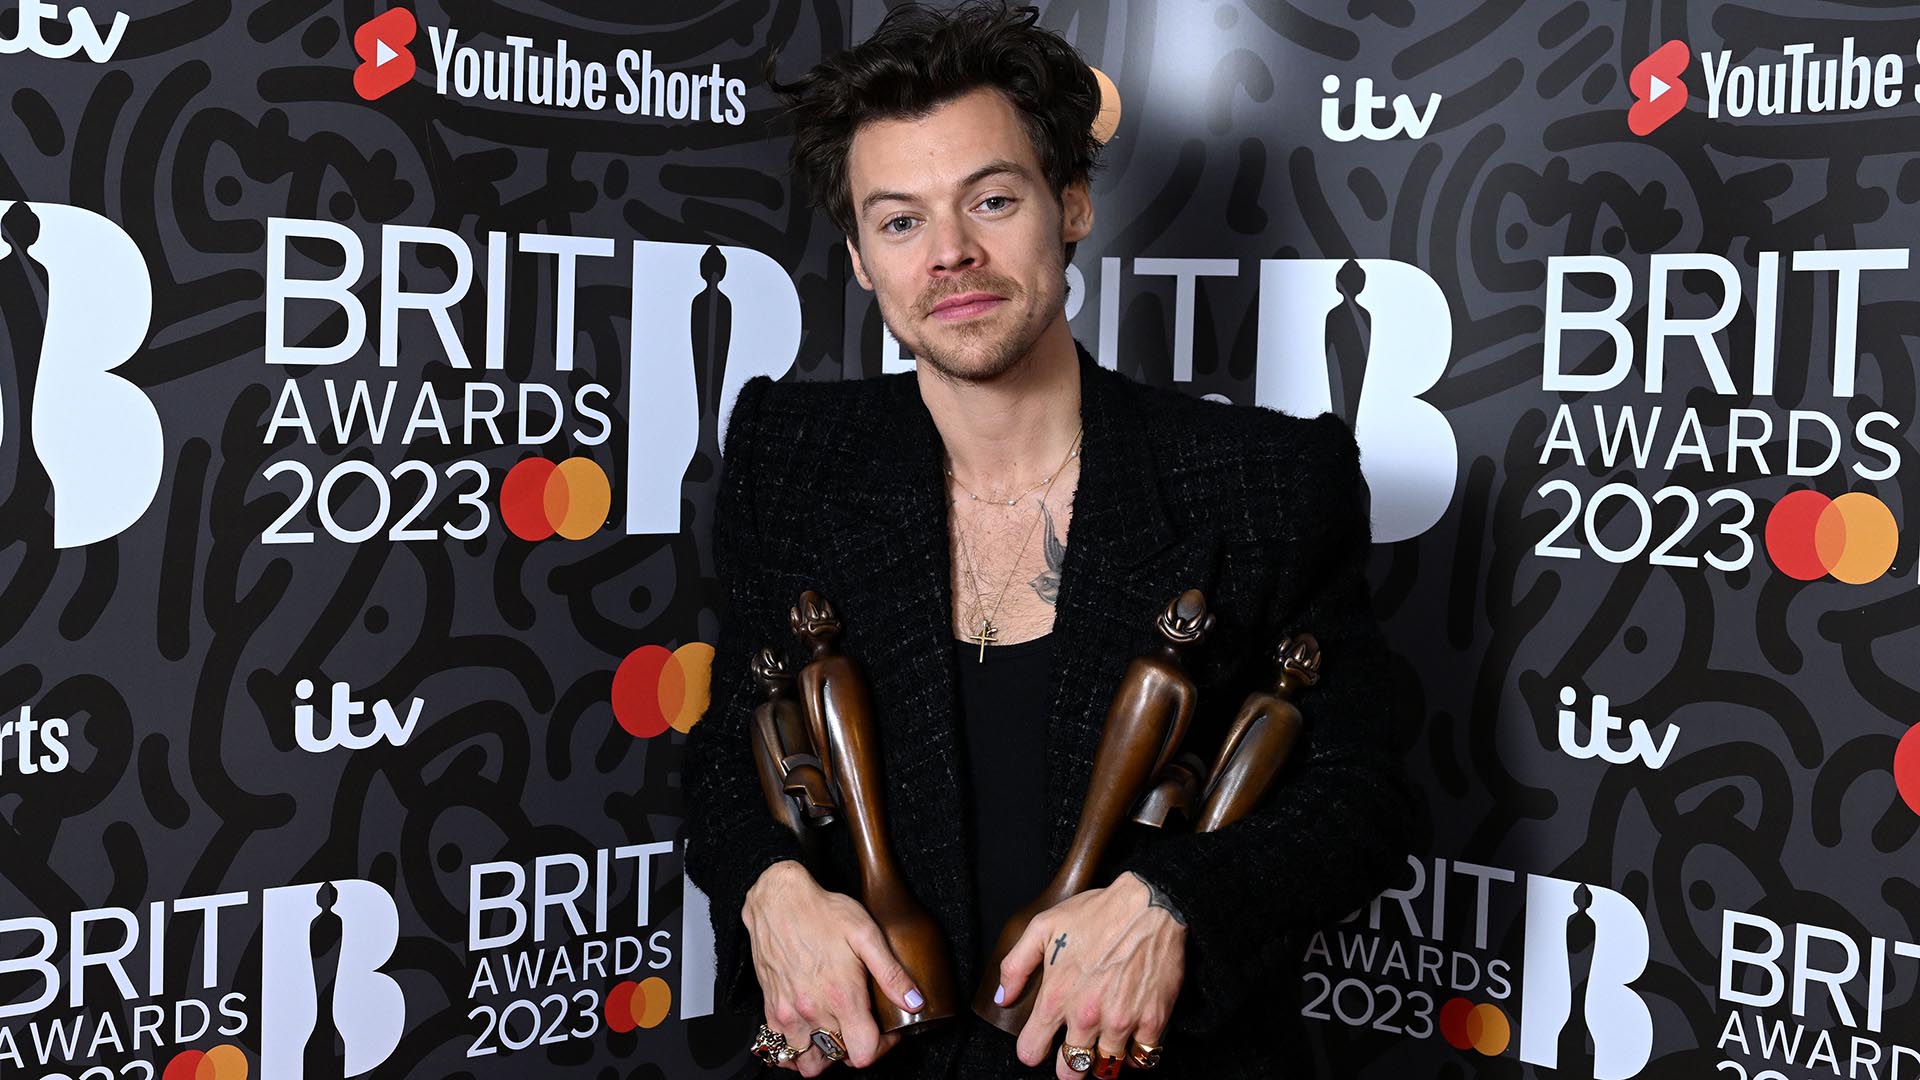 Harry Styles enjoys his awards at the 43rd BRIT Awards 2023. Image: Anthony Harvey/ Shutterstock